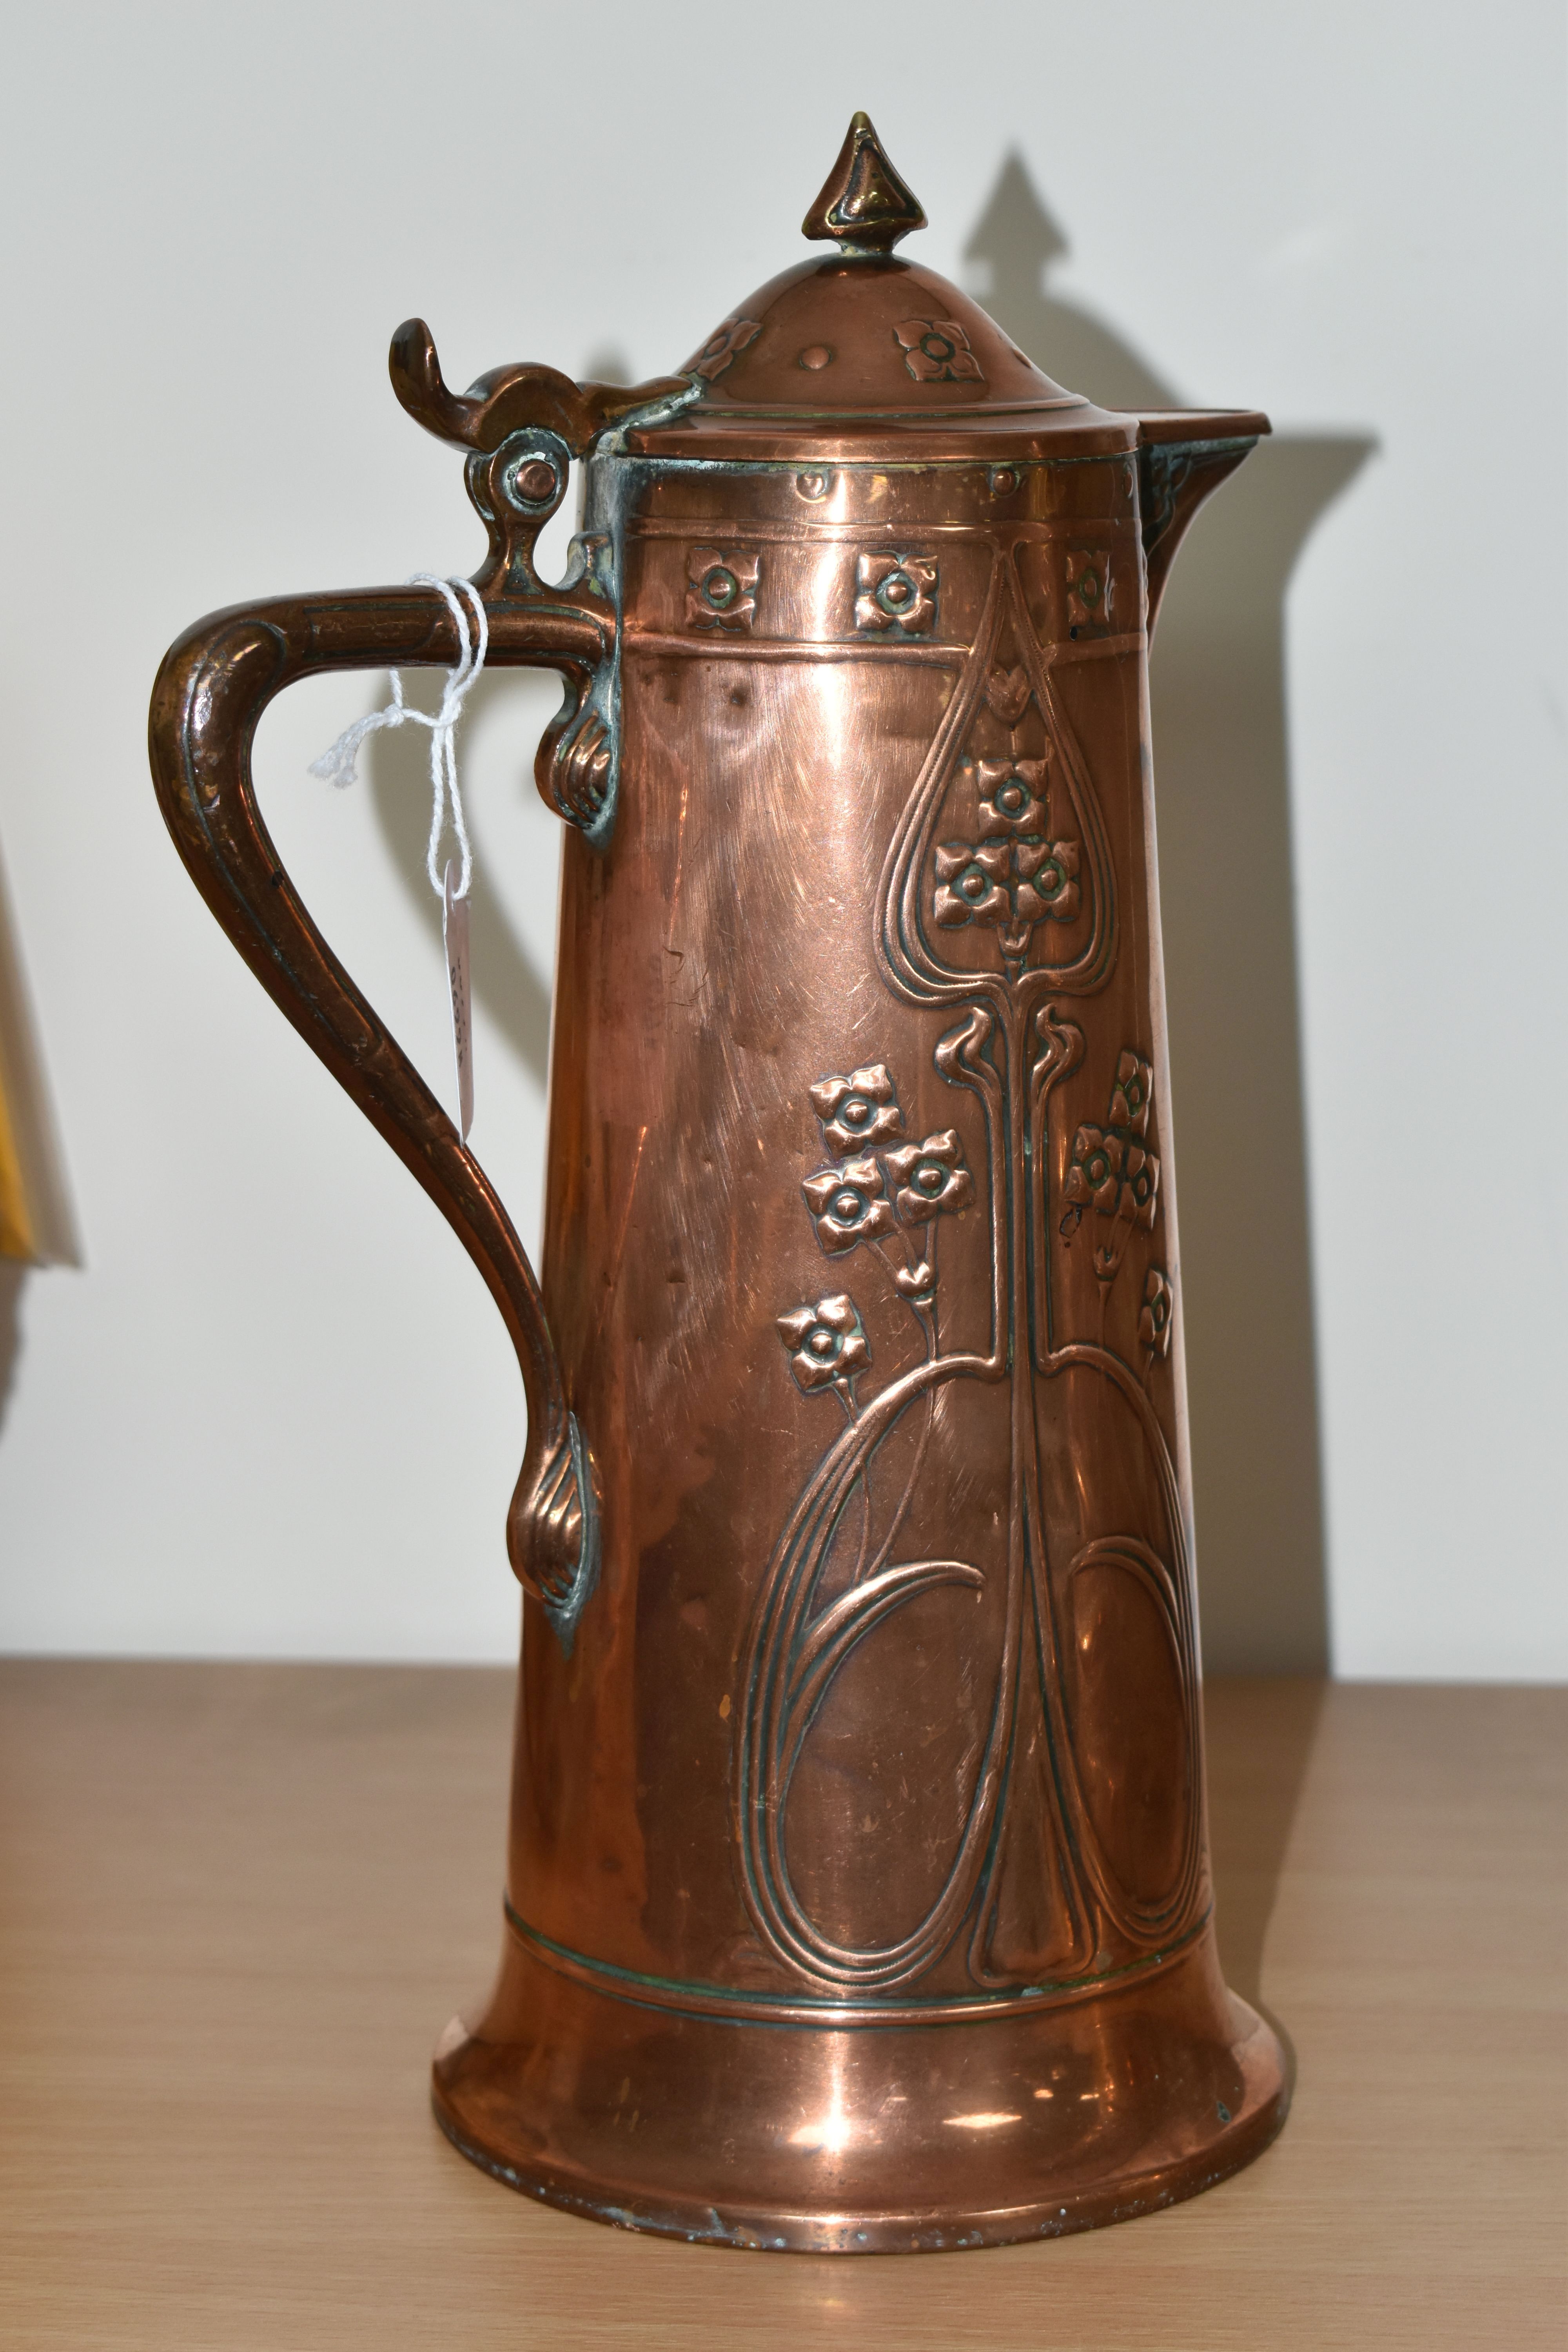 AN ART NOUVEAU COPPER JUG BY JOSEPH SANKEY & SONS, of covered tapering form, with stylised Art - Image 3 of 5